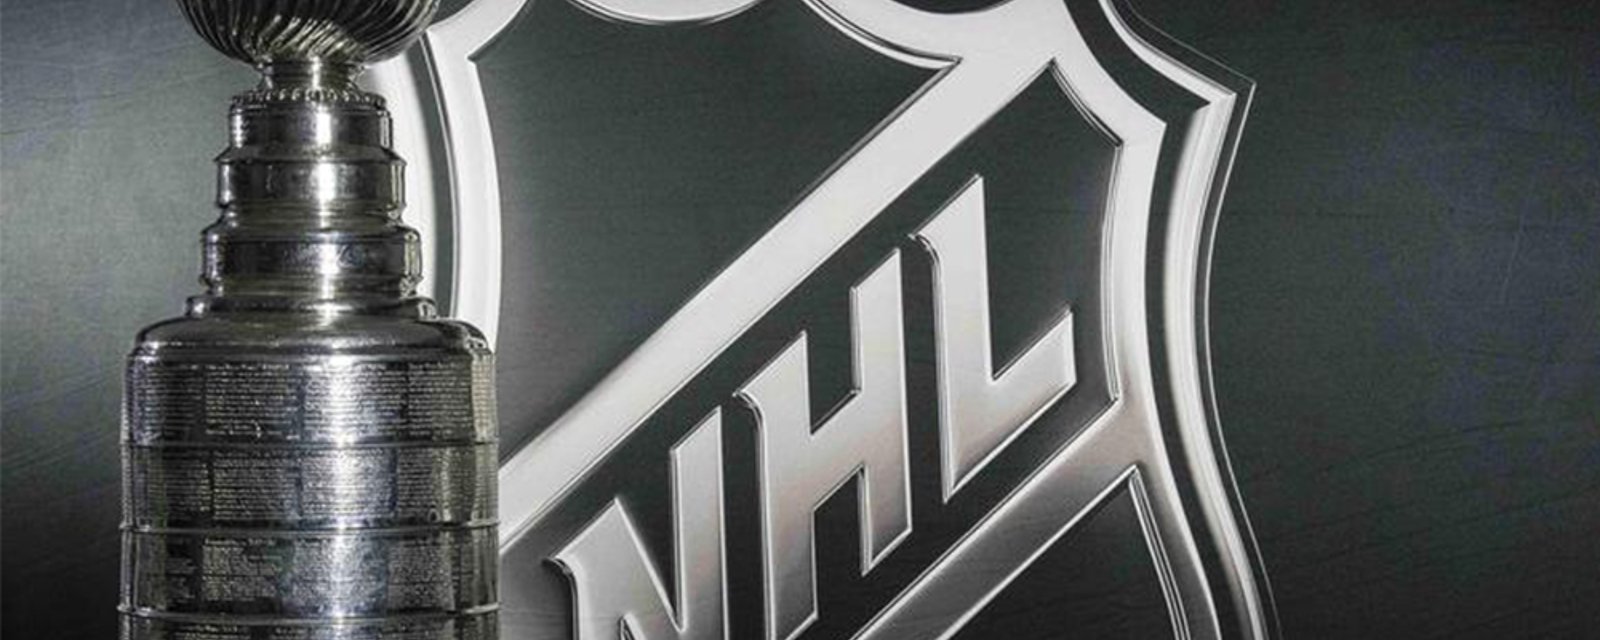 NHL announces changes to almost 30 games.